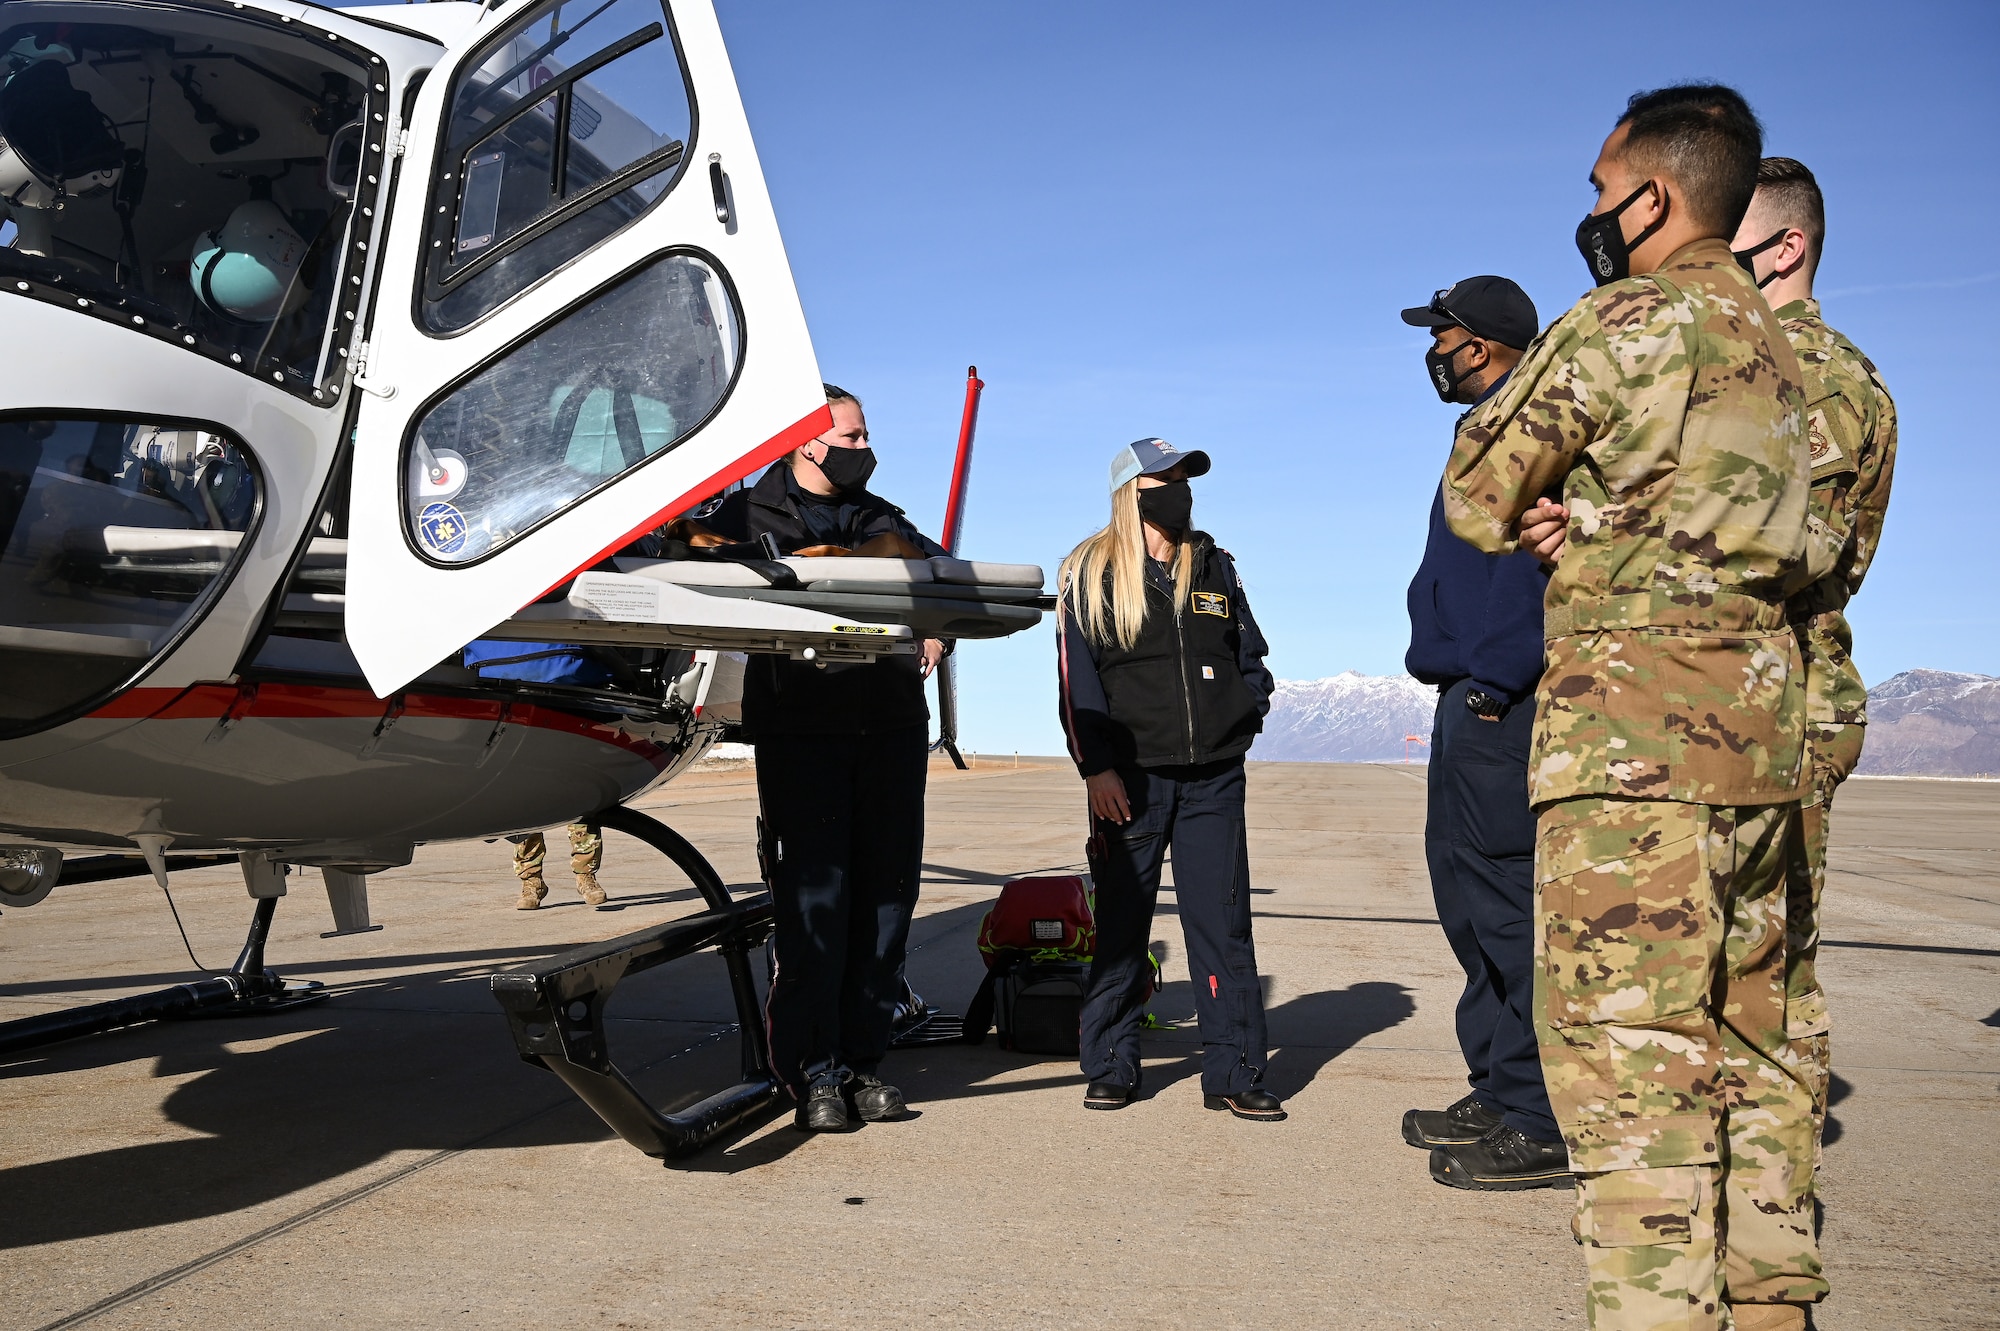 Erica Rau (left) and Crystal Causey, AirLife Utah trauma clinicians, speak with Hill firefighters during an air ambulance training event at Hill Air Force Base, Utah, Jan. 14. 2021. Hill's first responders conduct the annual training to remain proficient on air ambulance operations. The Ogden AirLife Utah base is located at Ogden Regional Medical Center. (U.S. Air Force photo by R. Nial Bradshaw)